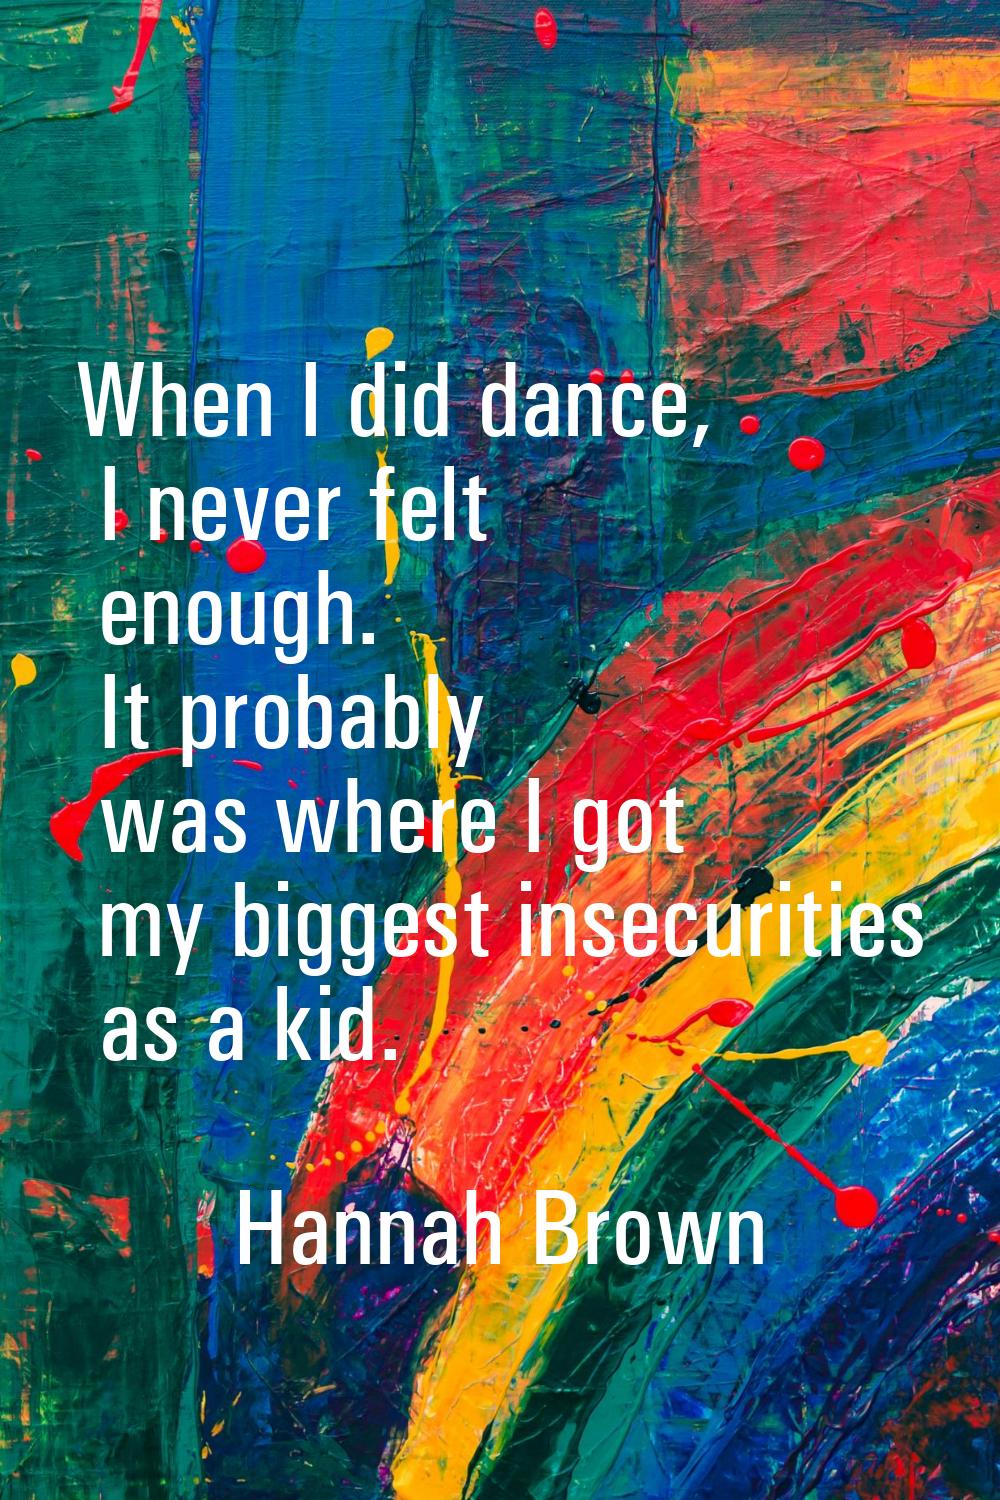 When I did dance, I never felt enough. It probably was where I got my biggest insecurities as a kid